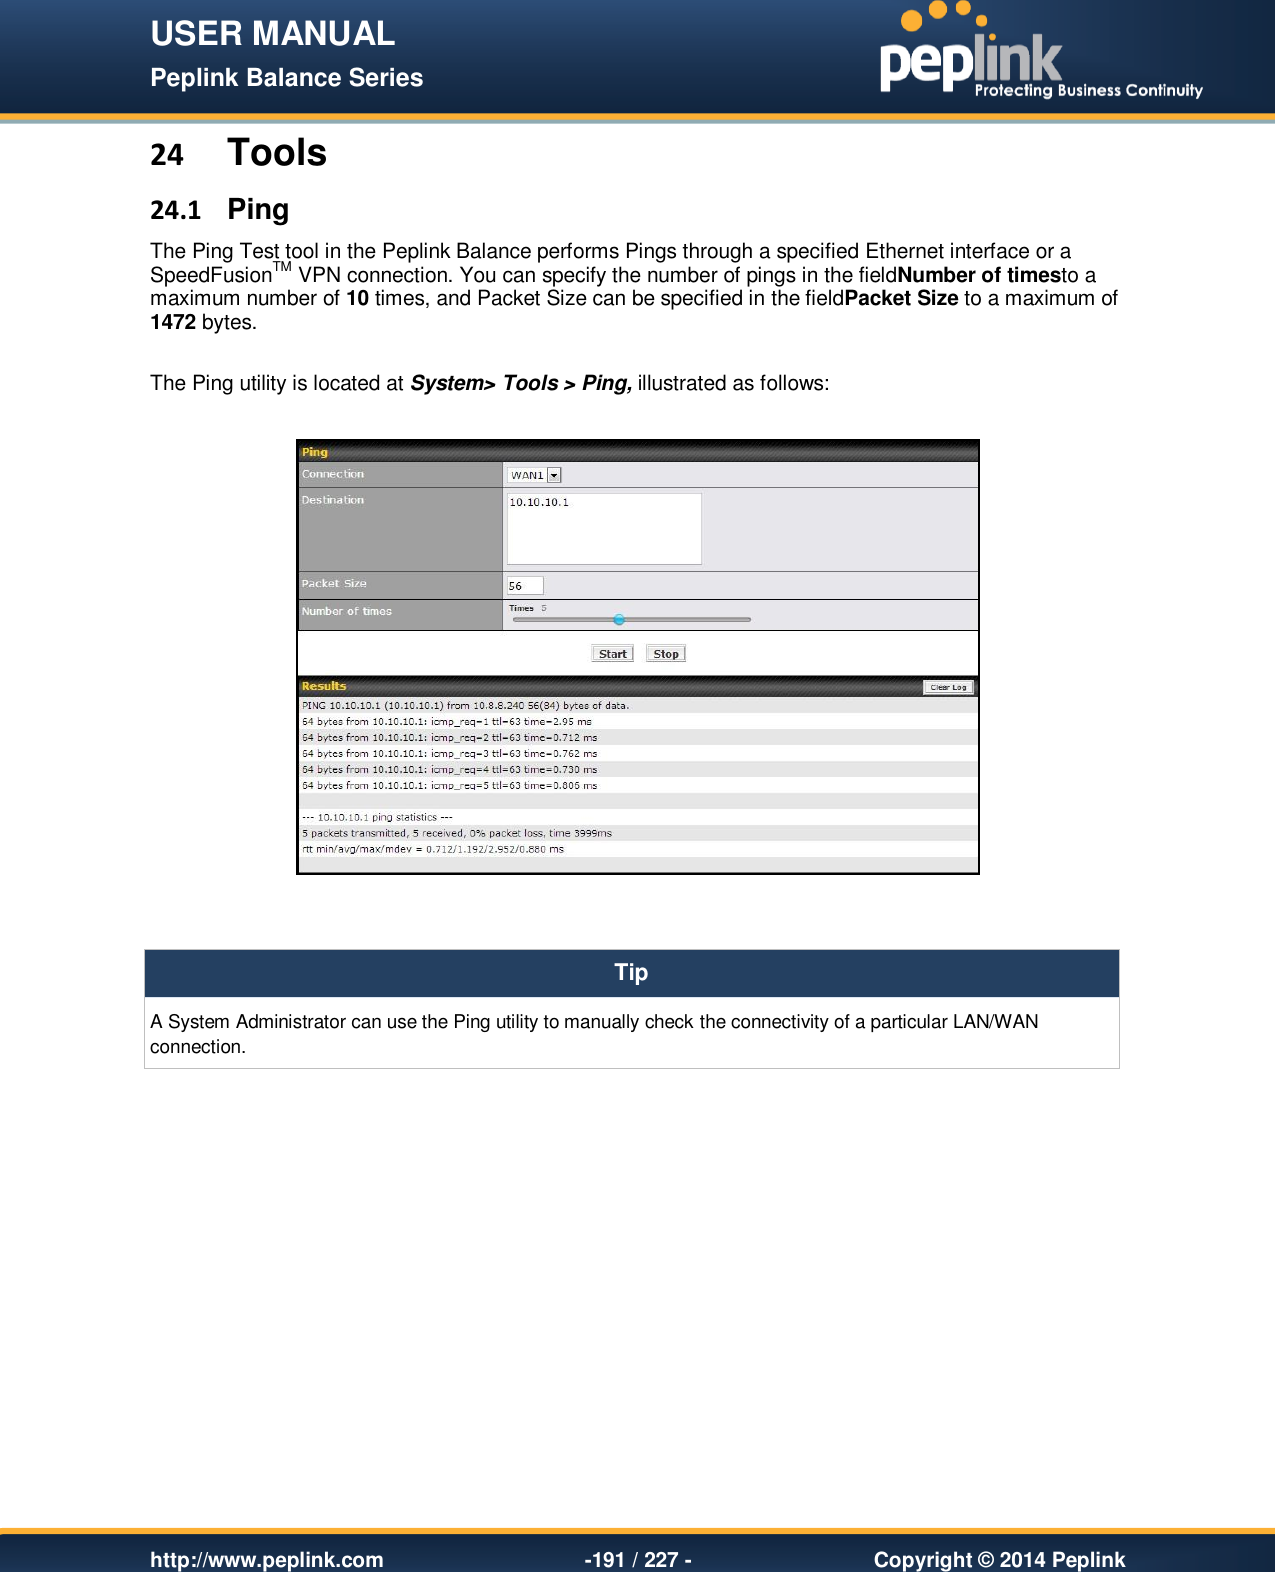 USER MANUAL Peplink Balance Series   http://www.peplink.com -191 / 227 -  Copyright © 2014 Peplink 24 Tools 24.1  Ping The Ping Test tool in the Peplink Balance performs Pings through a specified Ethernet interface or a SpeedFusionTM VPN connection. You can specify the number of pings in the fieldNumber of timesto a maximum number of 10 times, and Packet Size can be specified in the fieldPacket Size to a maximum of 1472 bytes.  The Ping utility is located at System&gt; Tools &gt; Ping, illustrated as follows:     Tip A System Administrator can use the Ping utility to manually check the connectivity of a particular LAN/WAN connection.   